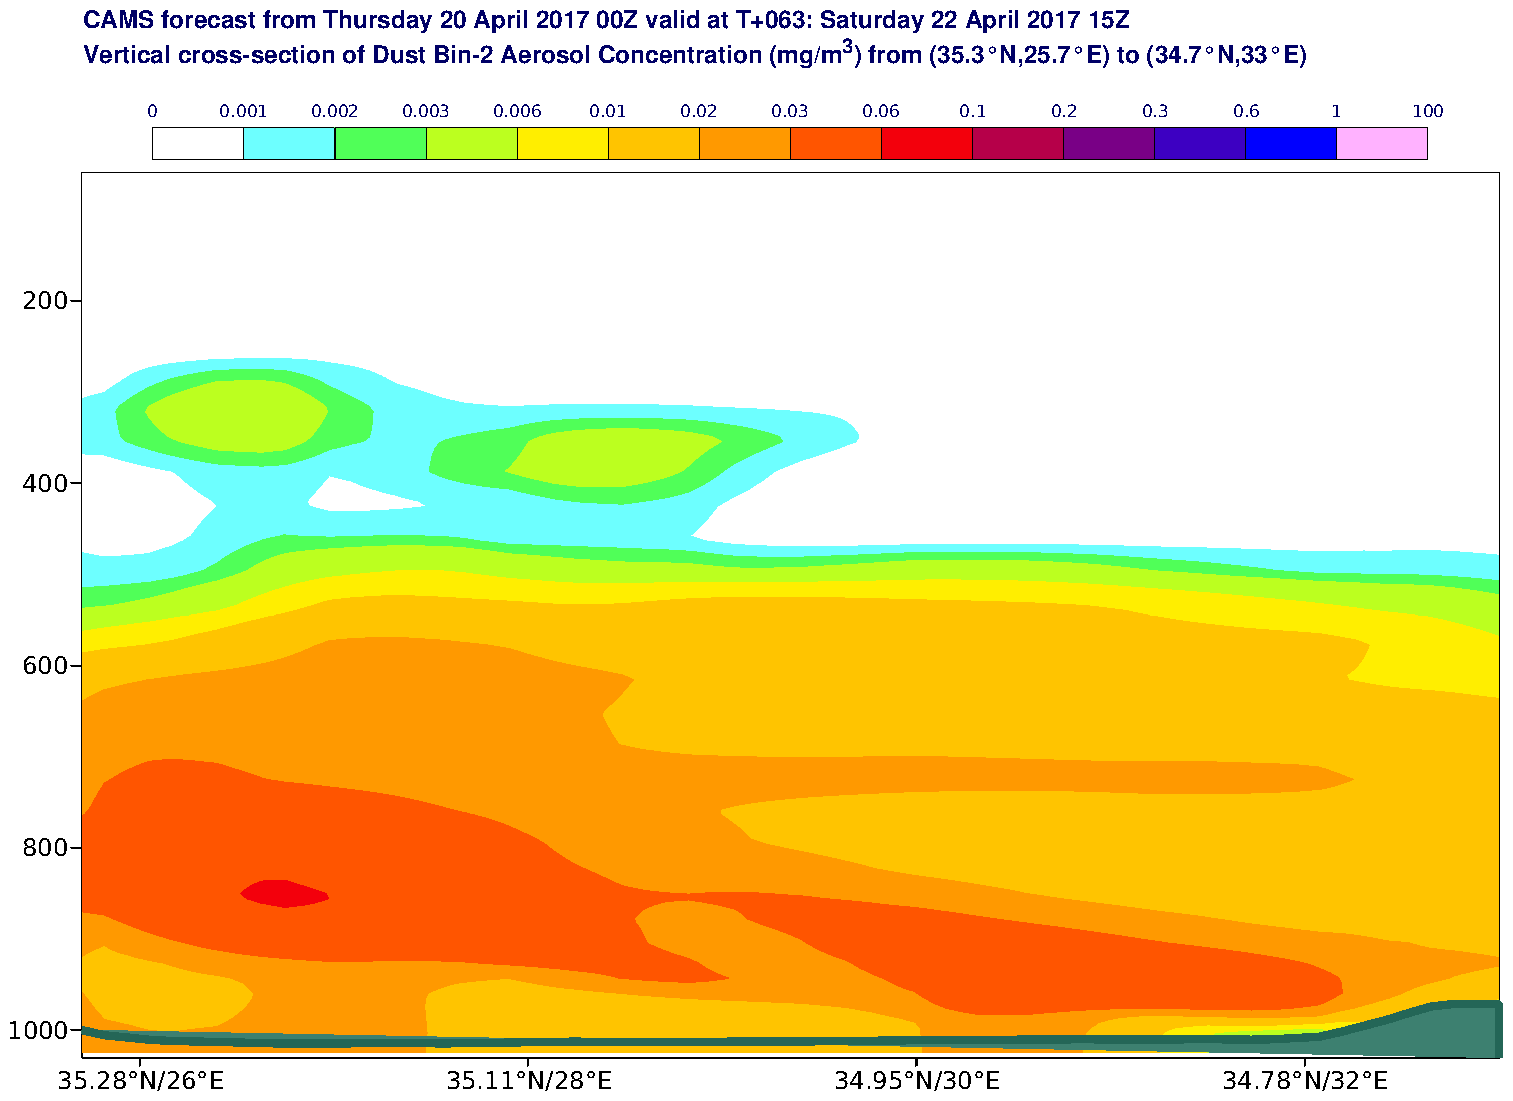 Vertical cross-section of Dust Bin-2 Aerosol Concentration (mg/m3) valid at T63 - 2017-04-22 15:00